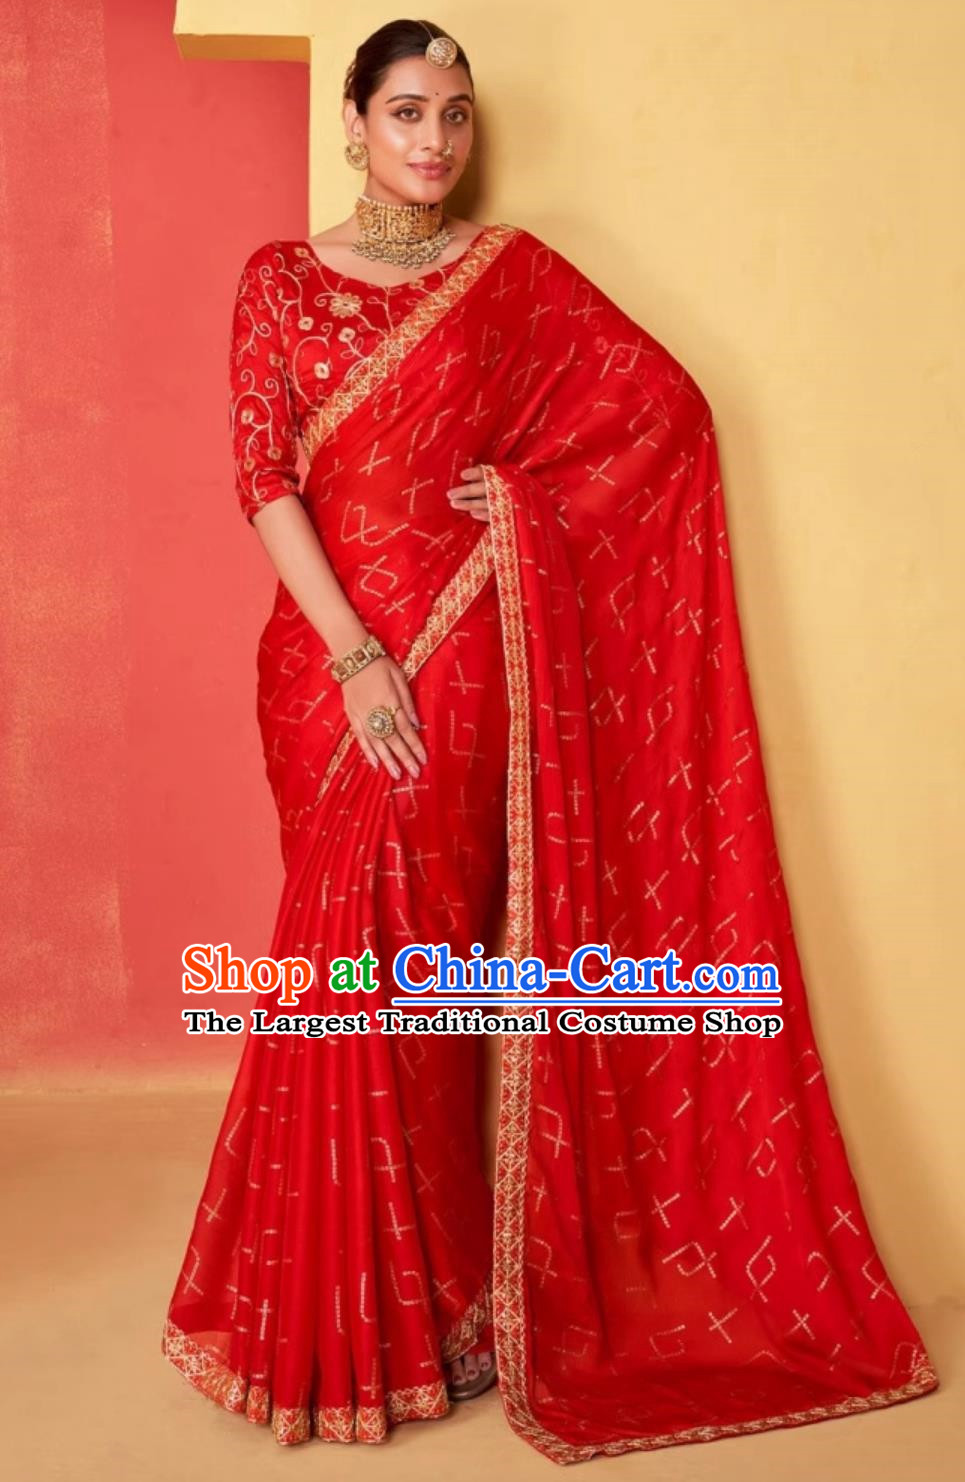 Big Red Chiffon Embroidered National Indian Saree Wedding Festival Party Wrap Dress